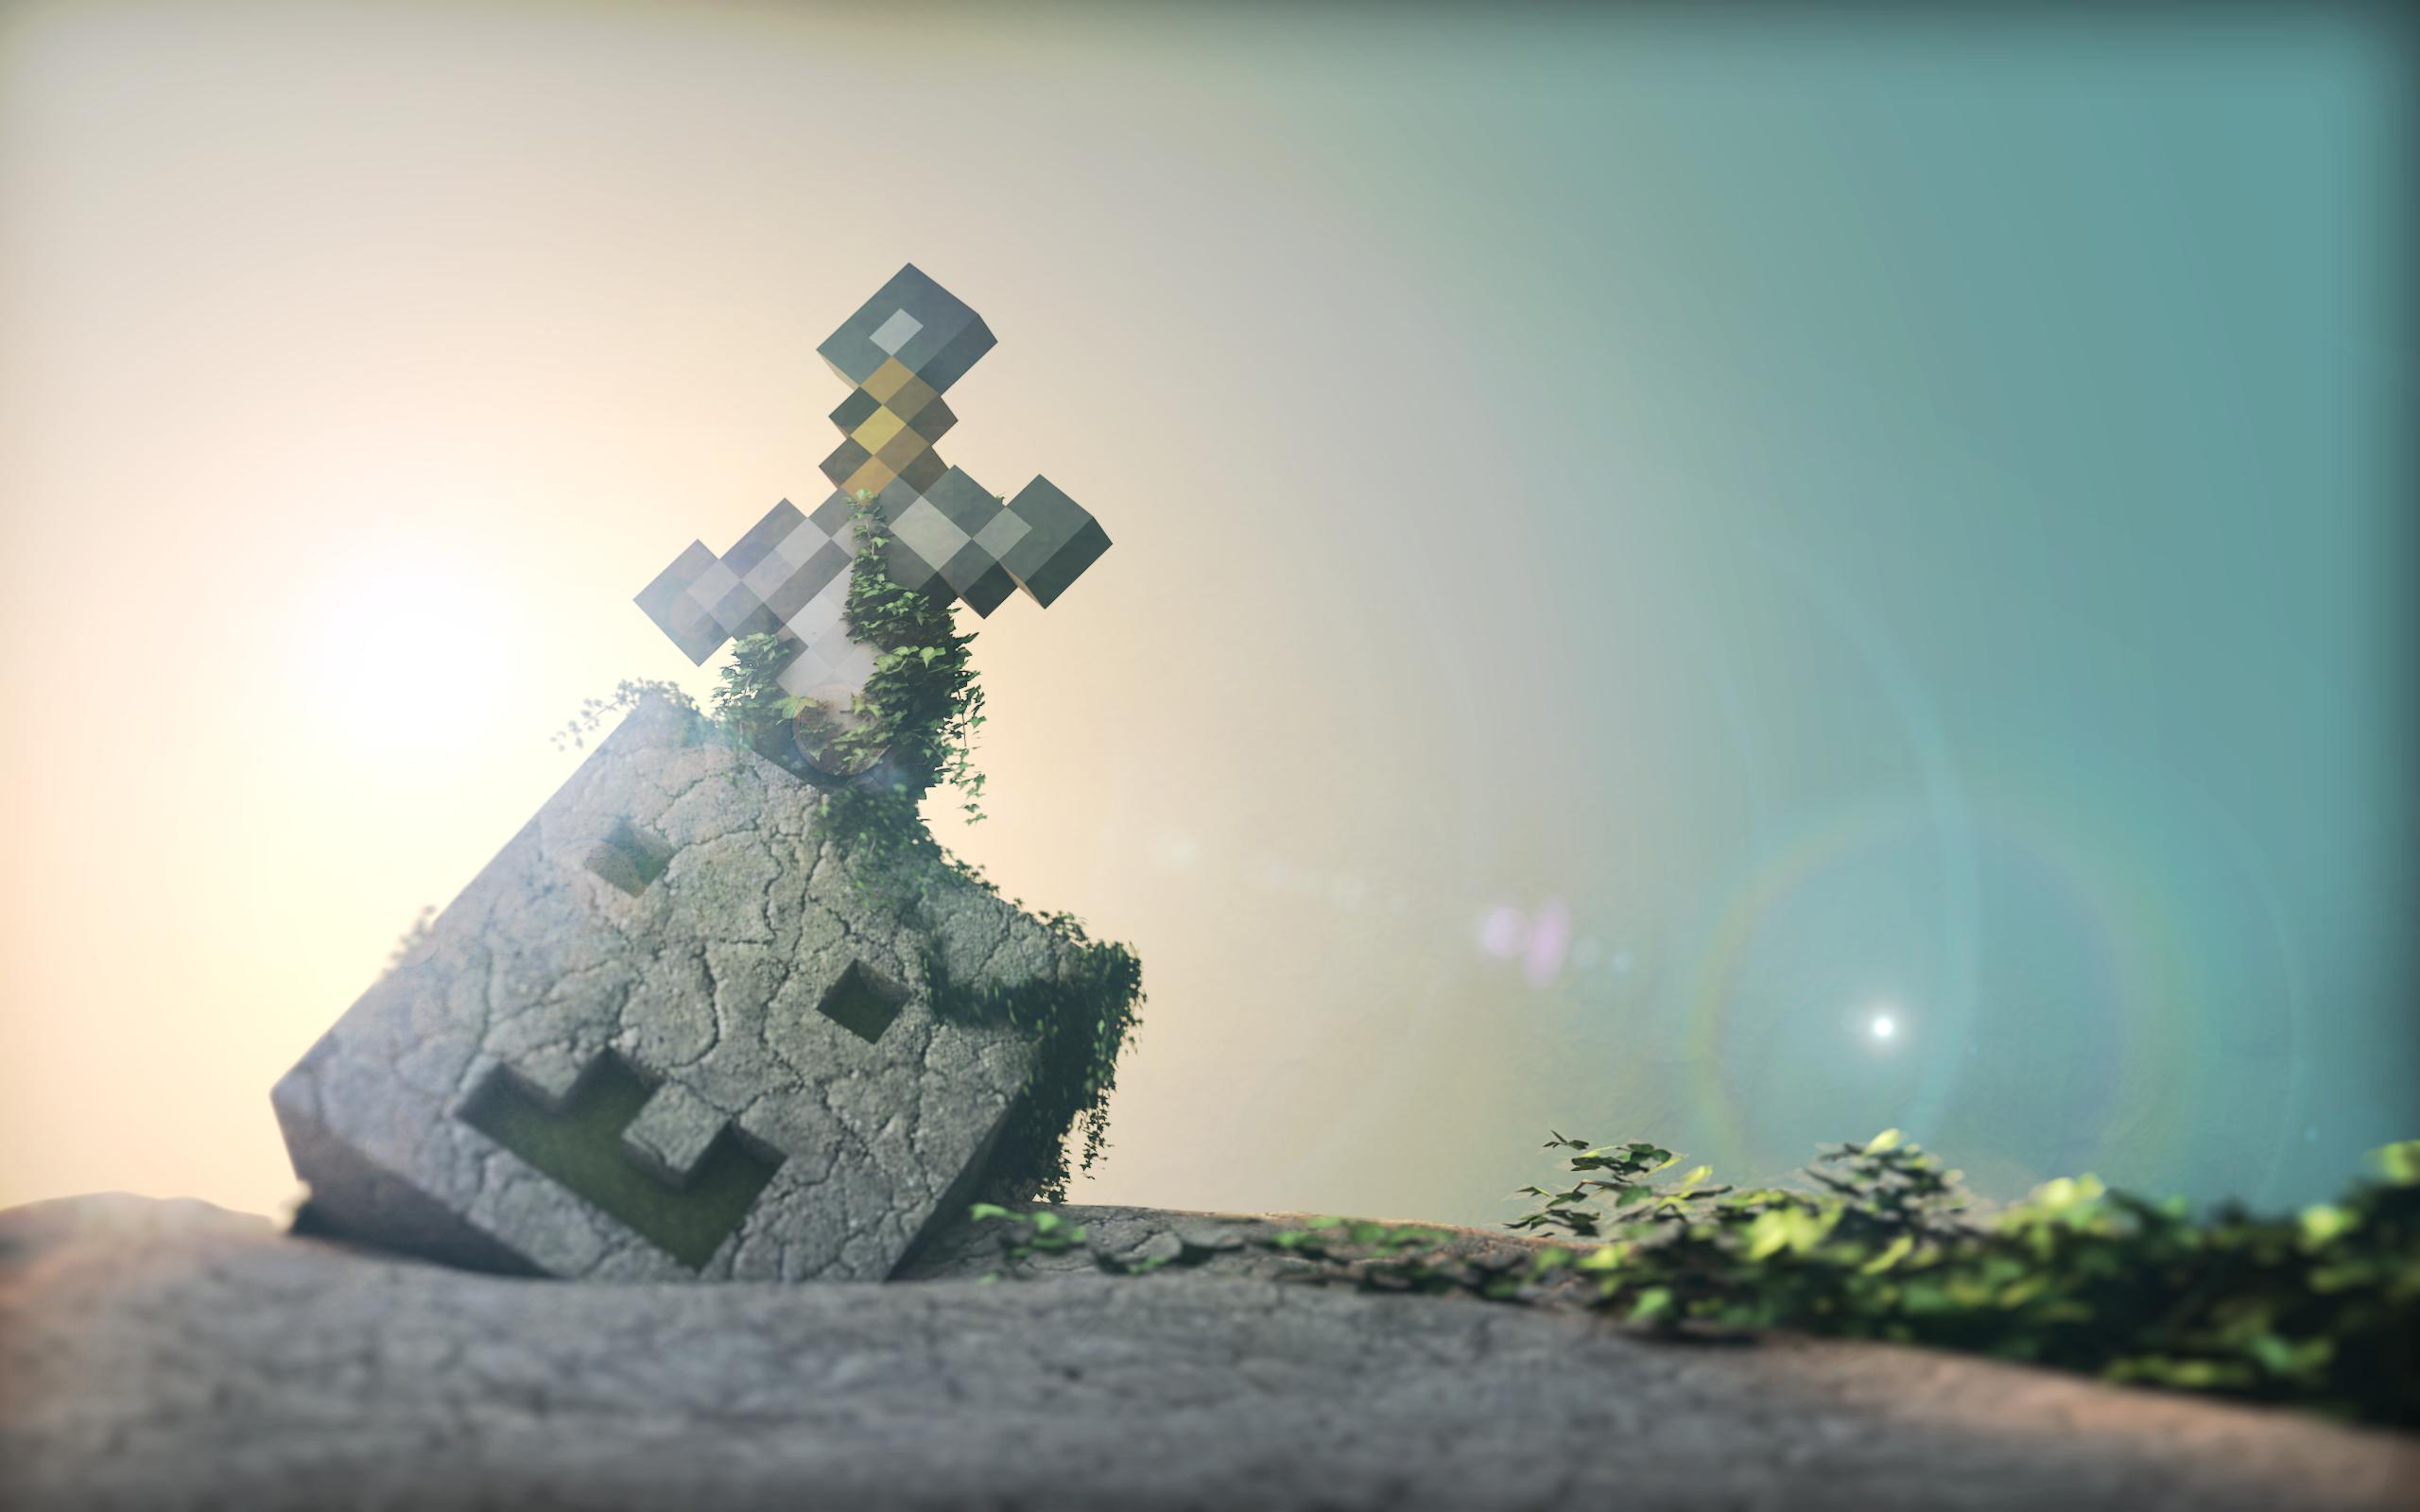 Minecraft Background Free download Wallpapers, Backgrounds